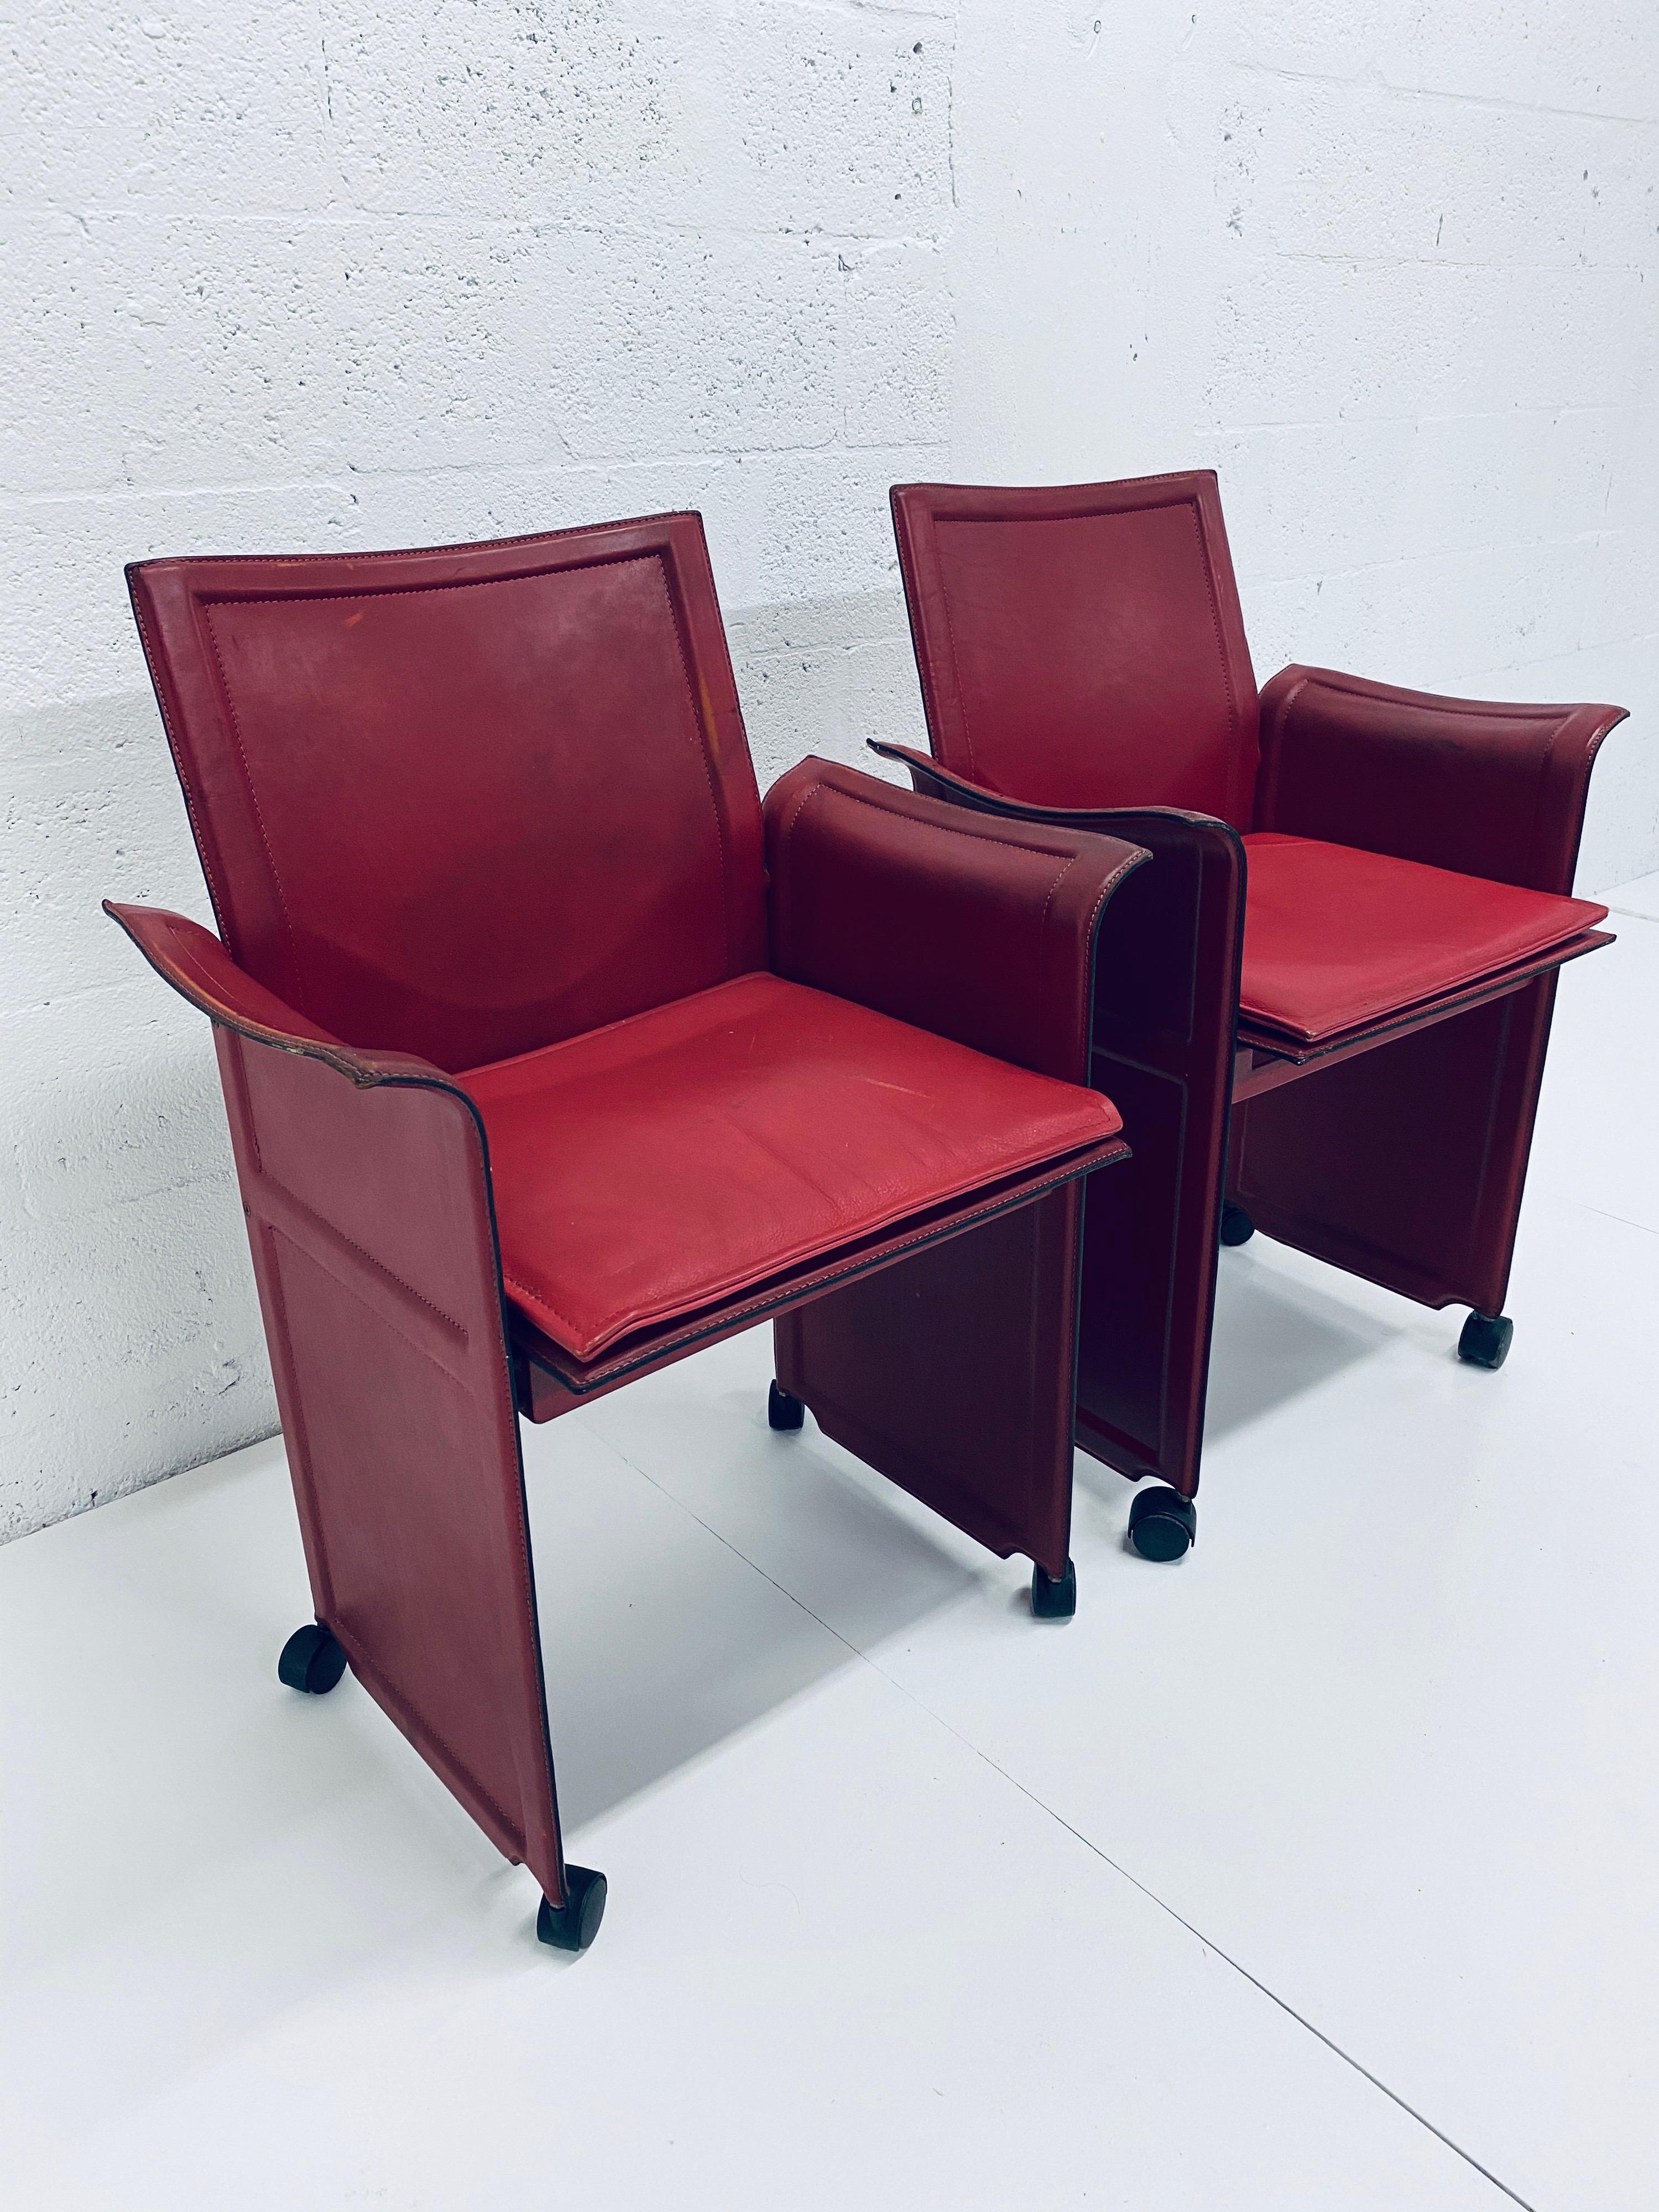 Pair of distressed red leather Korium chairs on removable casters by Tito Agnoli for Matteo Grassi. The arms have a wing like appearance and the seats come with an extra cushion for comfort.